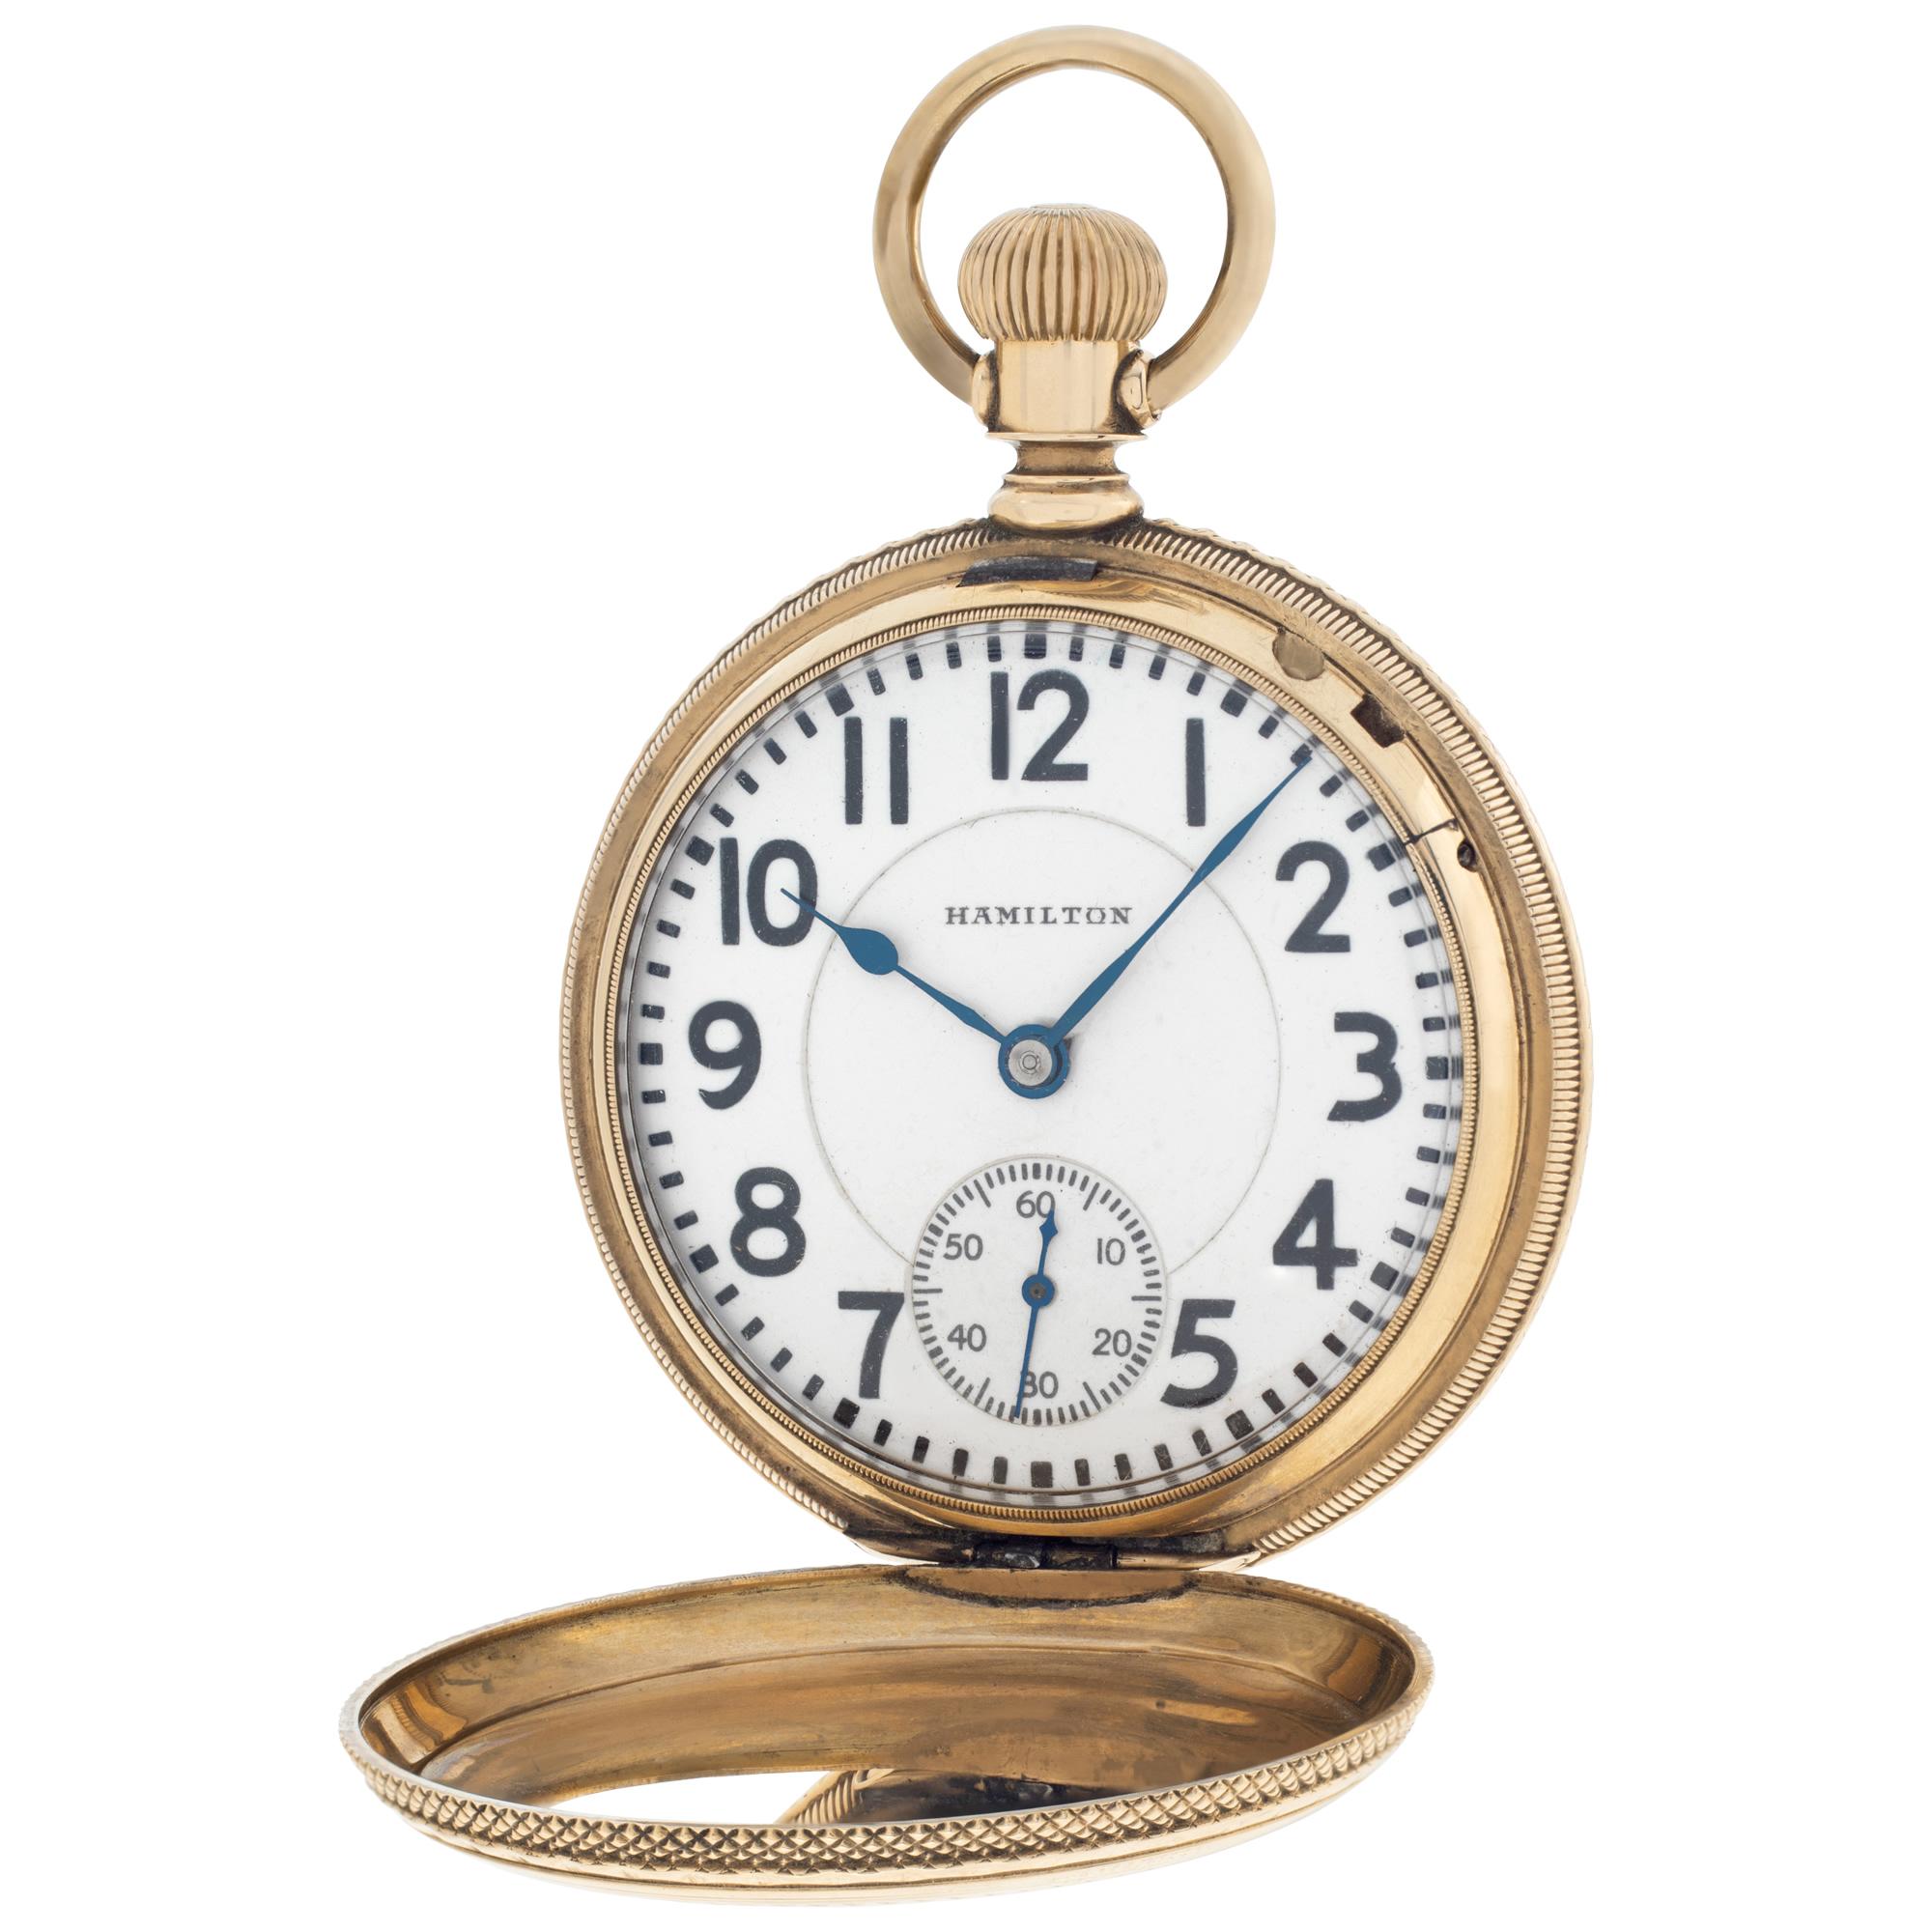 Hamilton Hunter Case pocket watch in 14k yellow gold. Triple sunk white dial with bold Arabic numerals and sub-seconds. 16 size case with 51 mm diameter. Presentation engraving dated 1886. Double roller 21 jewel manual wind movement. Lever set. Ref